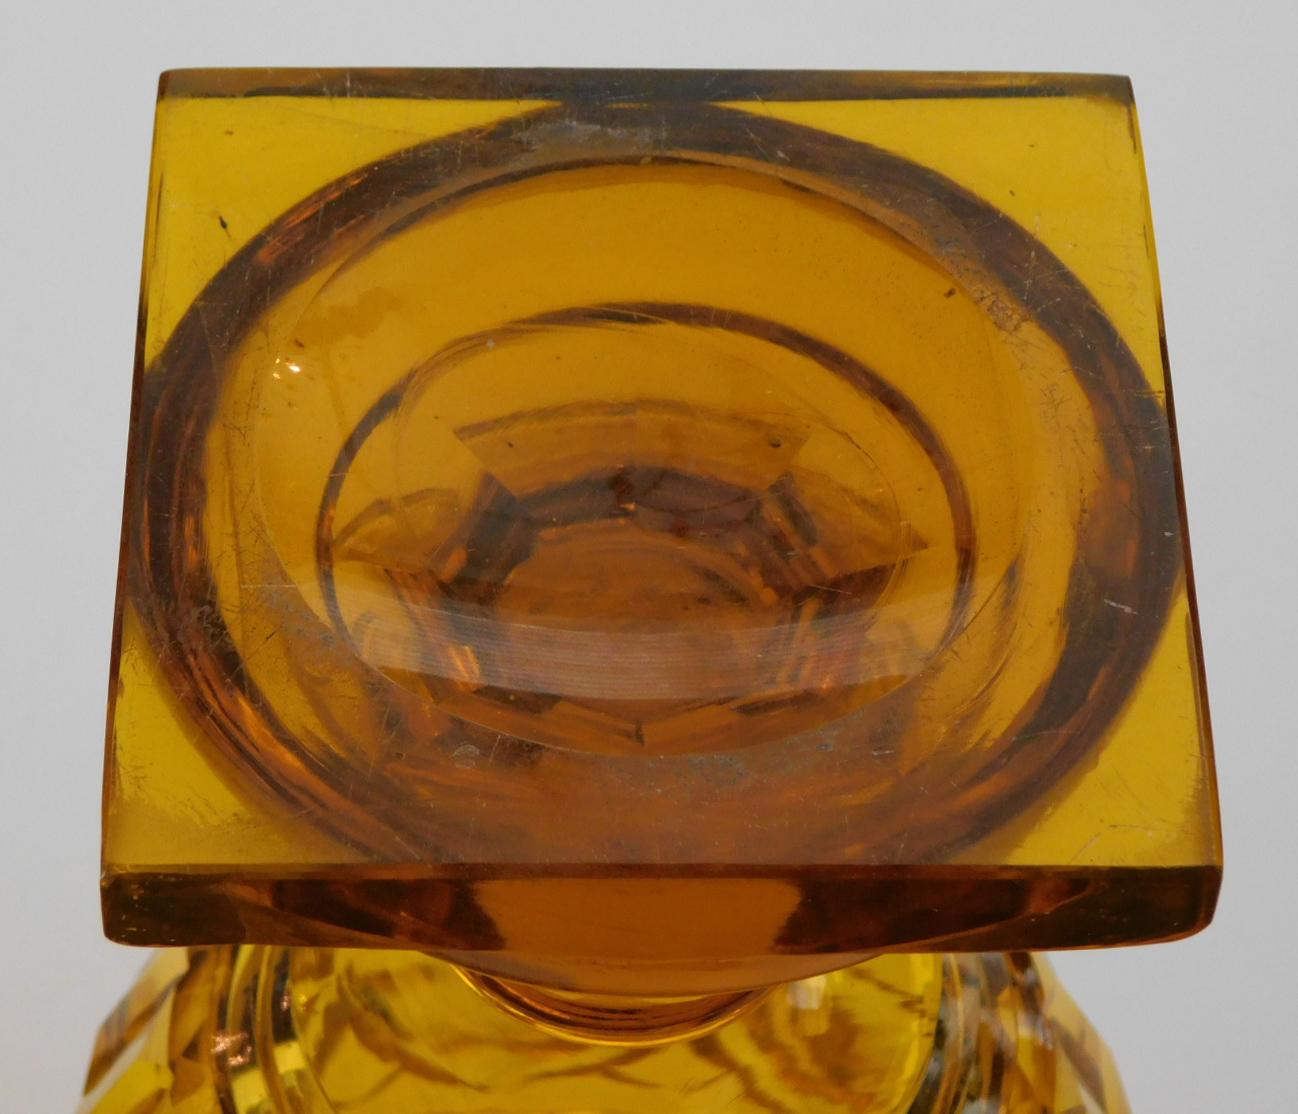 the all panel-cut jar with splayed cover topped with a faceted finial knob all resting on an ovoid body; unsigned; in the manner of Moser Glassworks.